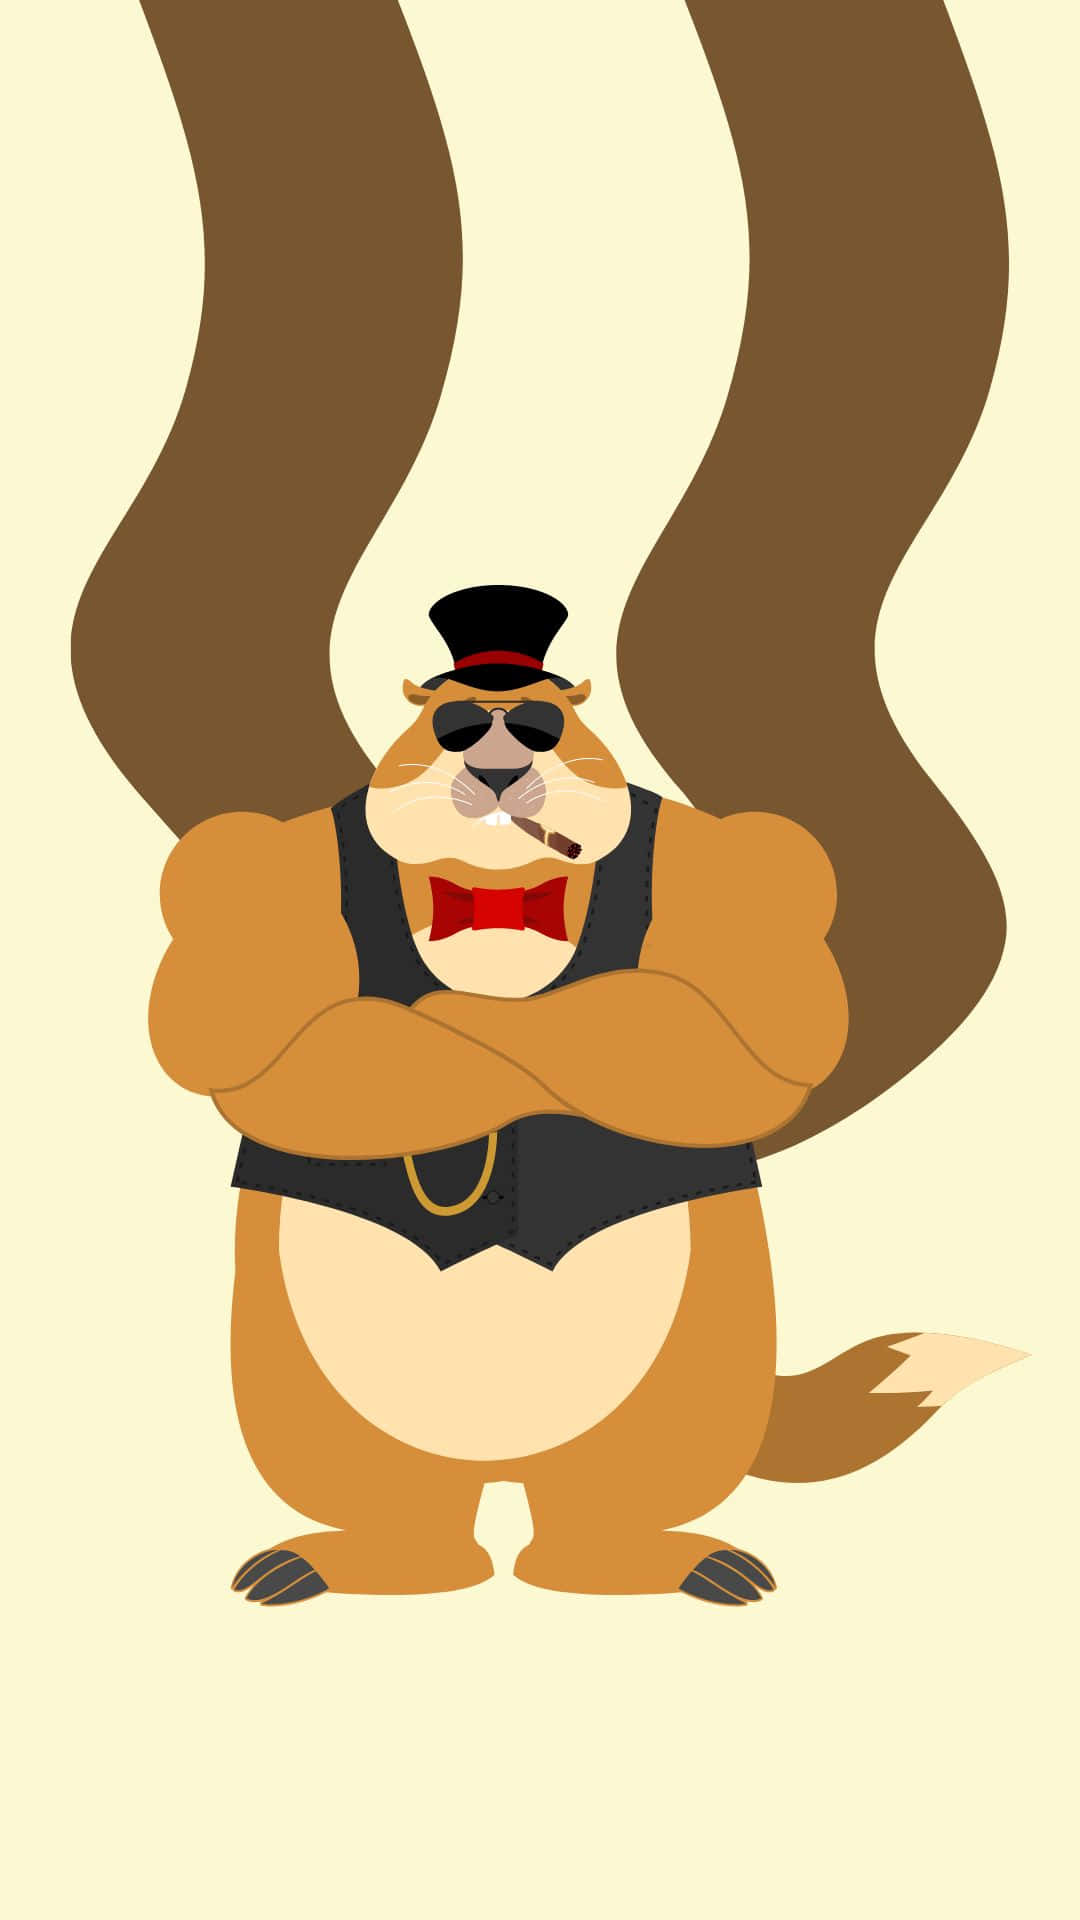 A Cartoon Bear With A Top Hat And A Hat Background